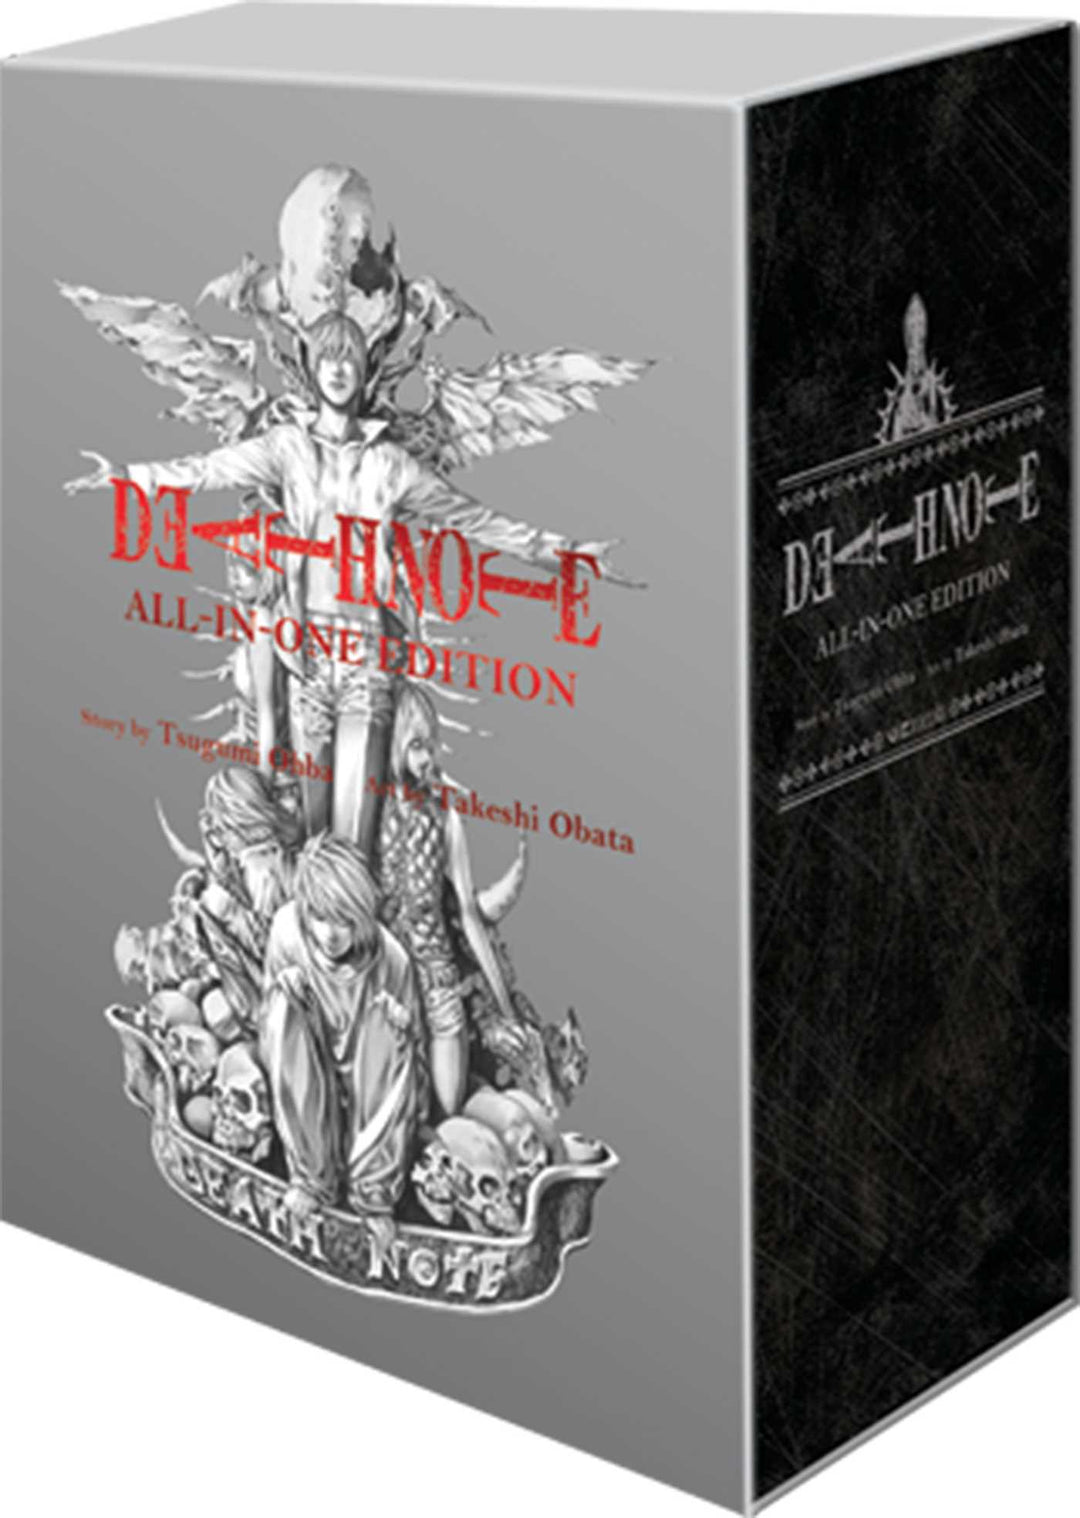 Death Note (All-in-One Edition) - Manga Mate